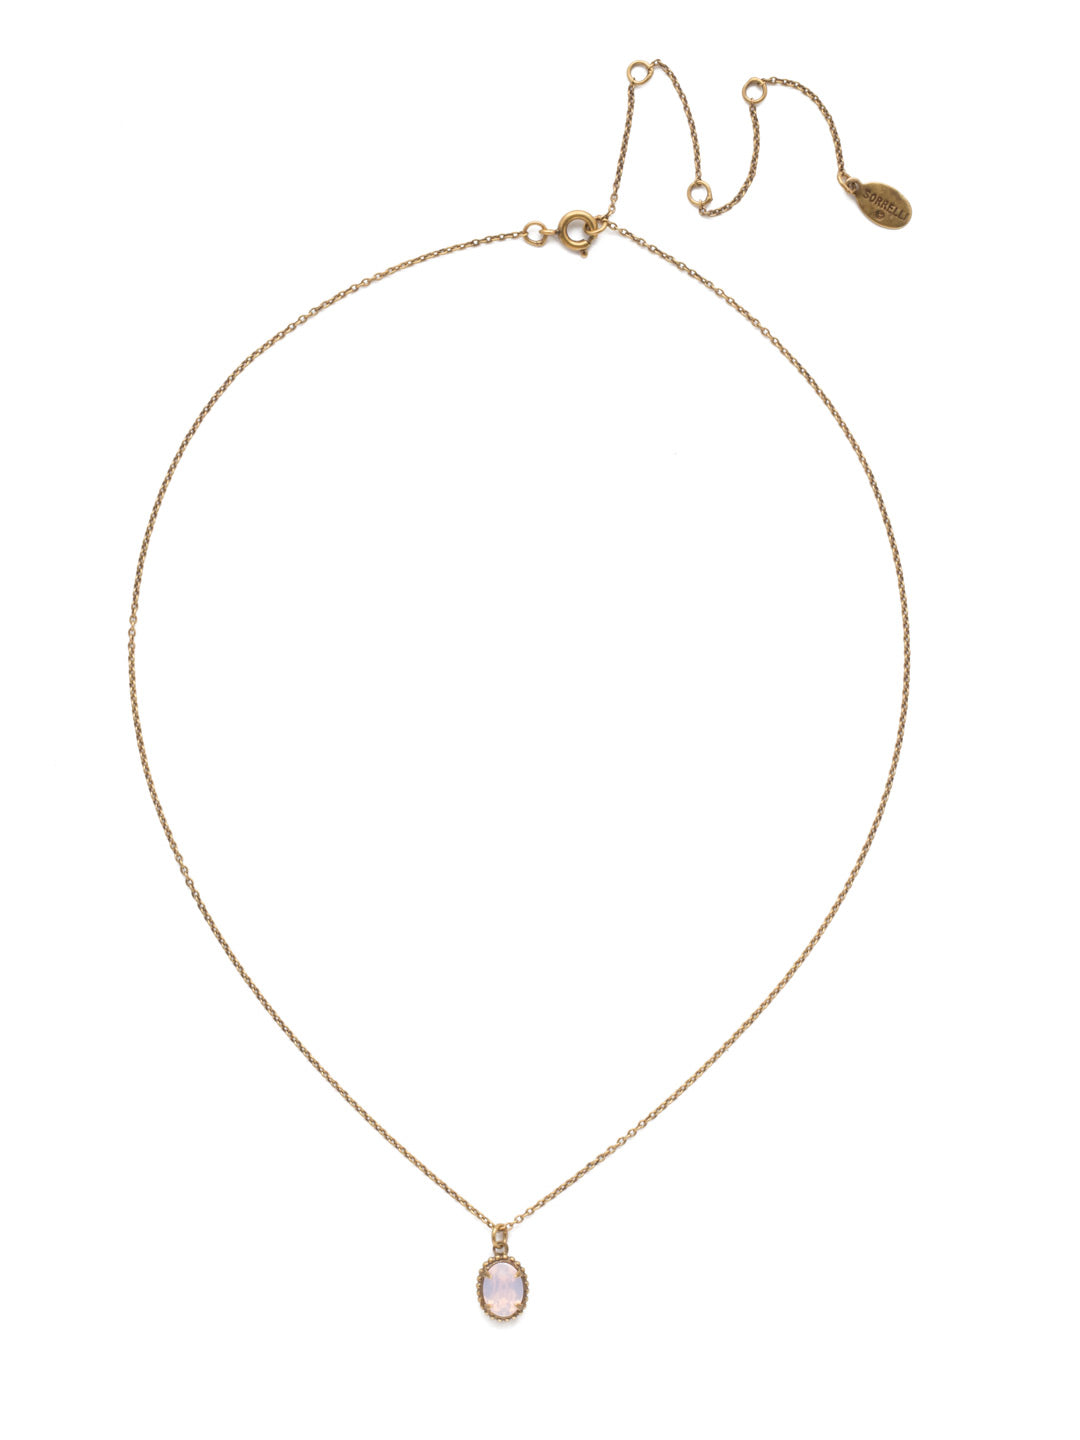 Maisie Pendant Necklace - NEF49AGROW - <p>This is the perfect day-to-night sparkling tiny pendant necklace that has an adjustable chain to fit your neckline. From Sorrelli's Rose Water collection in our Antique Gold-tone finish.</p>